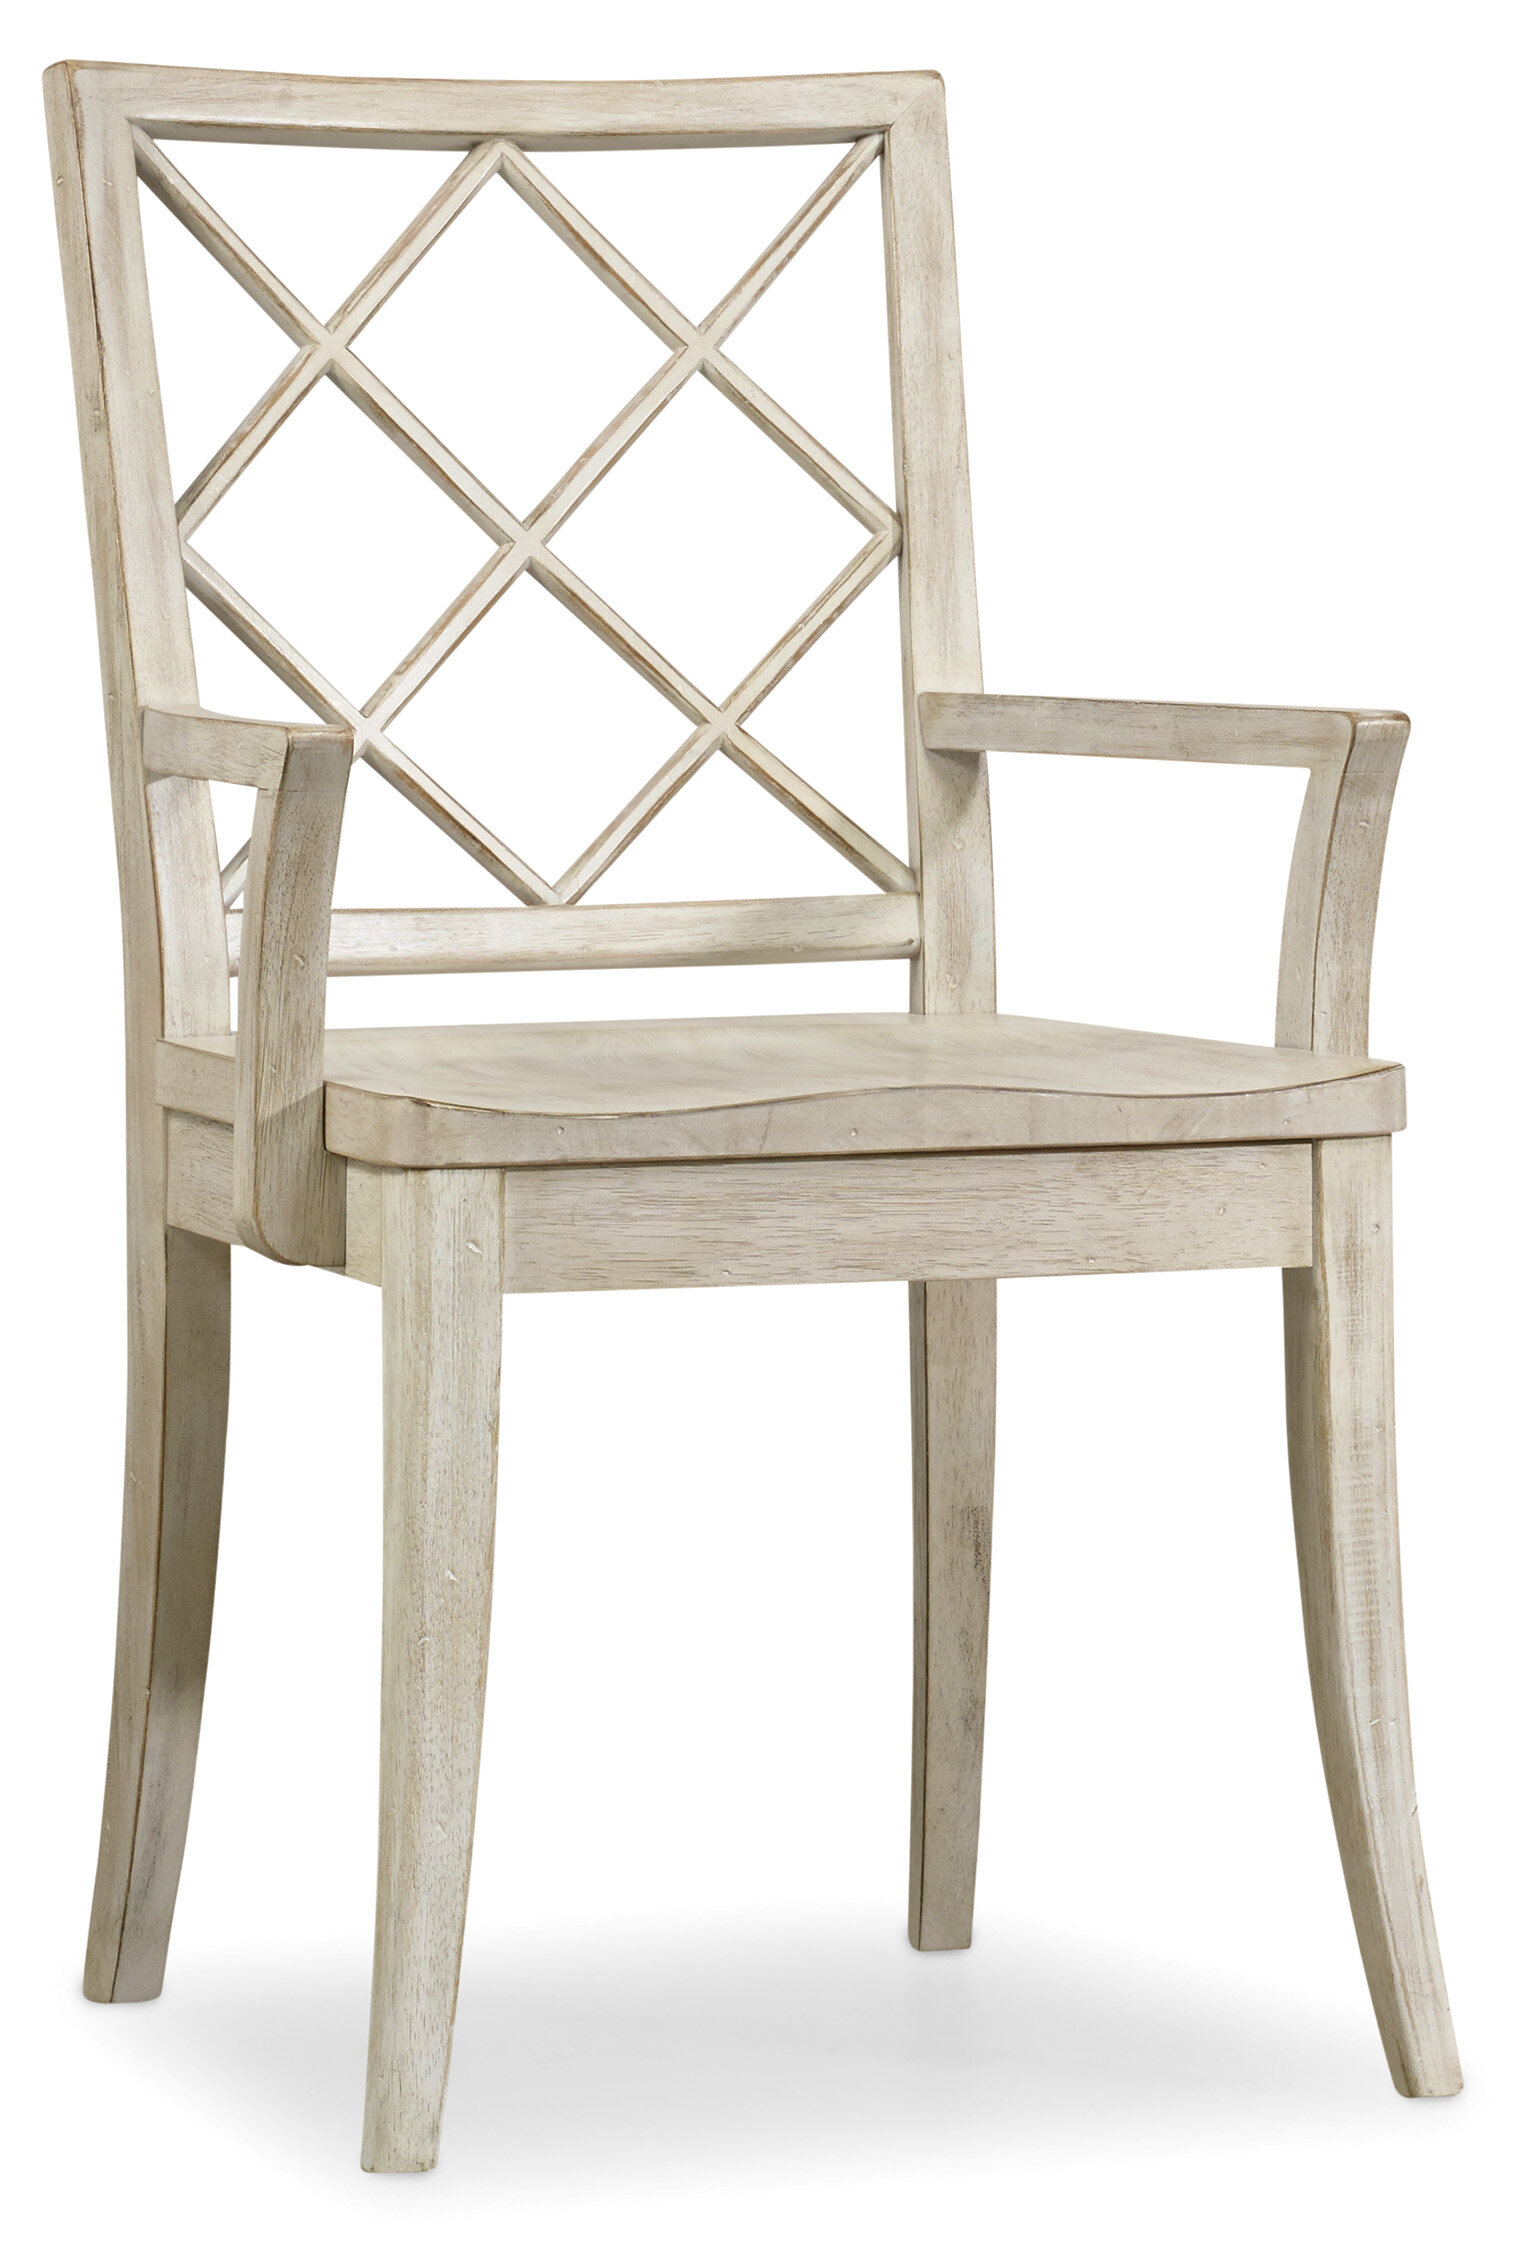 White X Back Dining Chair - X Back Chair Medium Natural With White